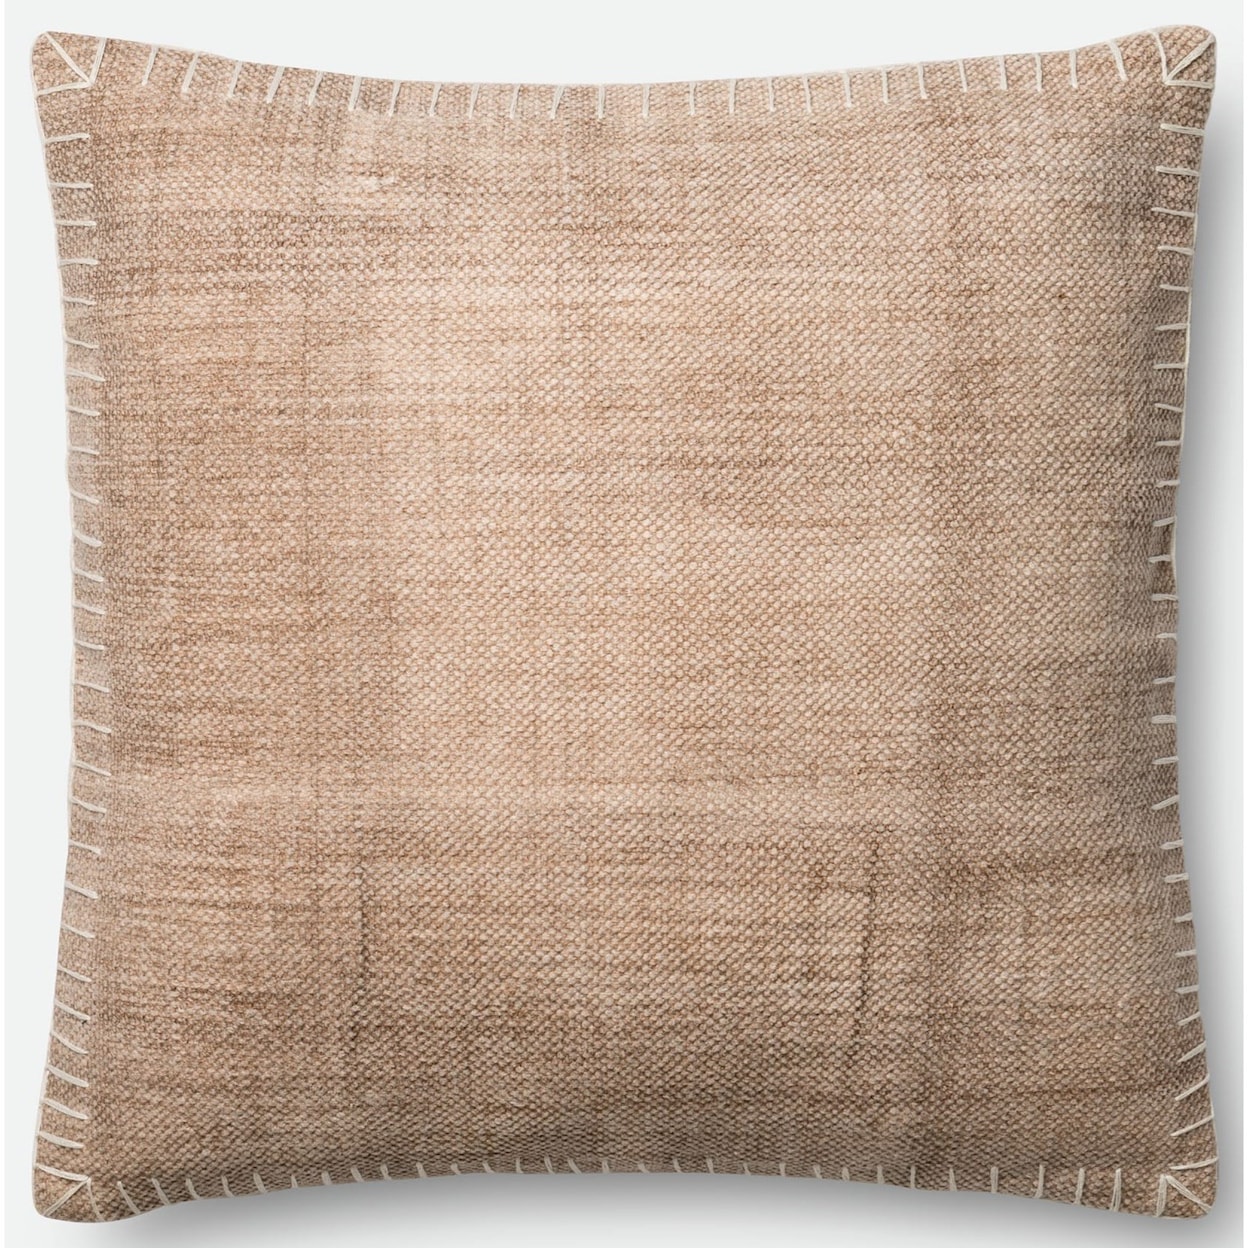 Magnolia Home by Joanna Gaines for Loloi Accent Pillows 22" X 22" Cover w/Down Pillow